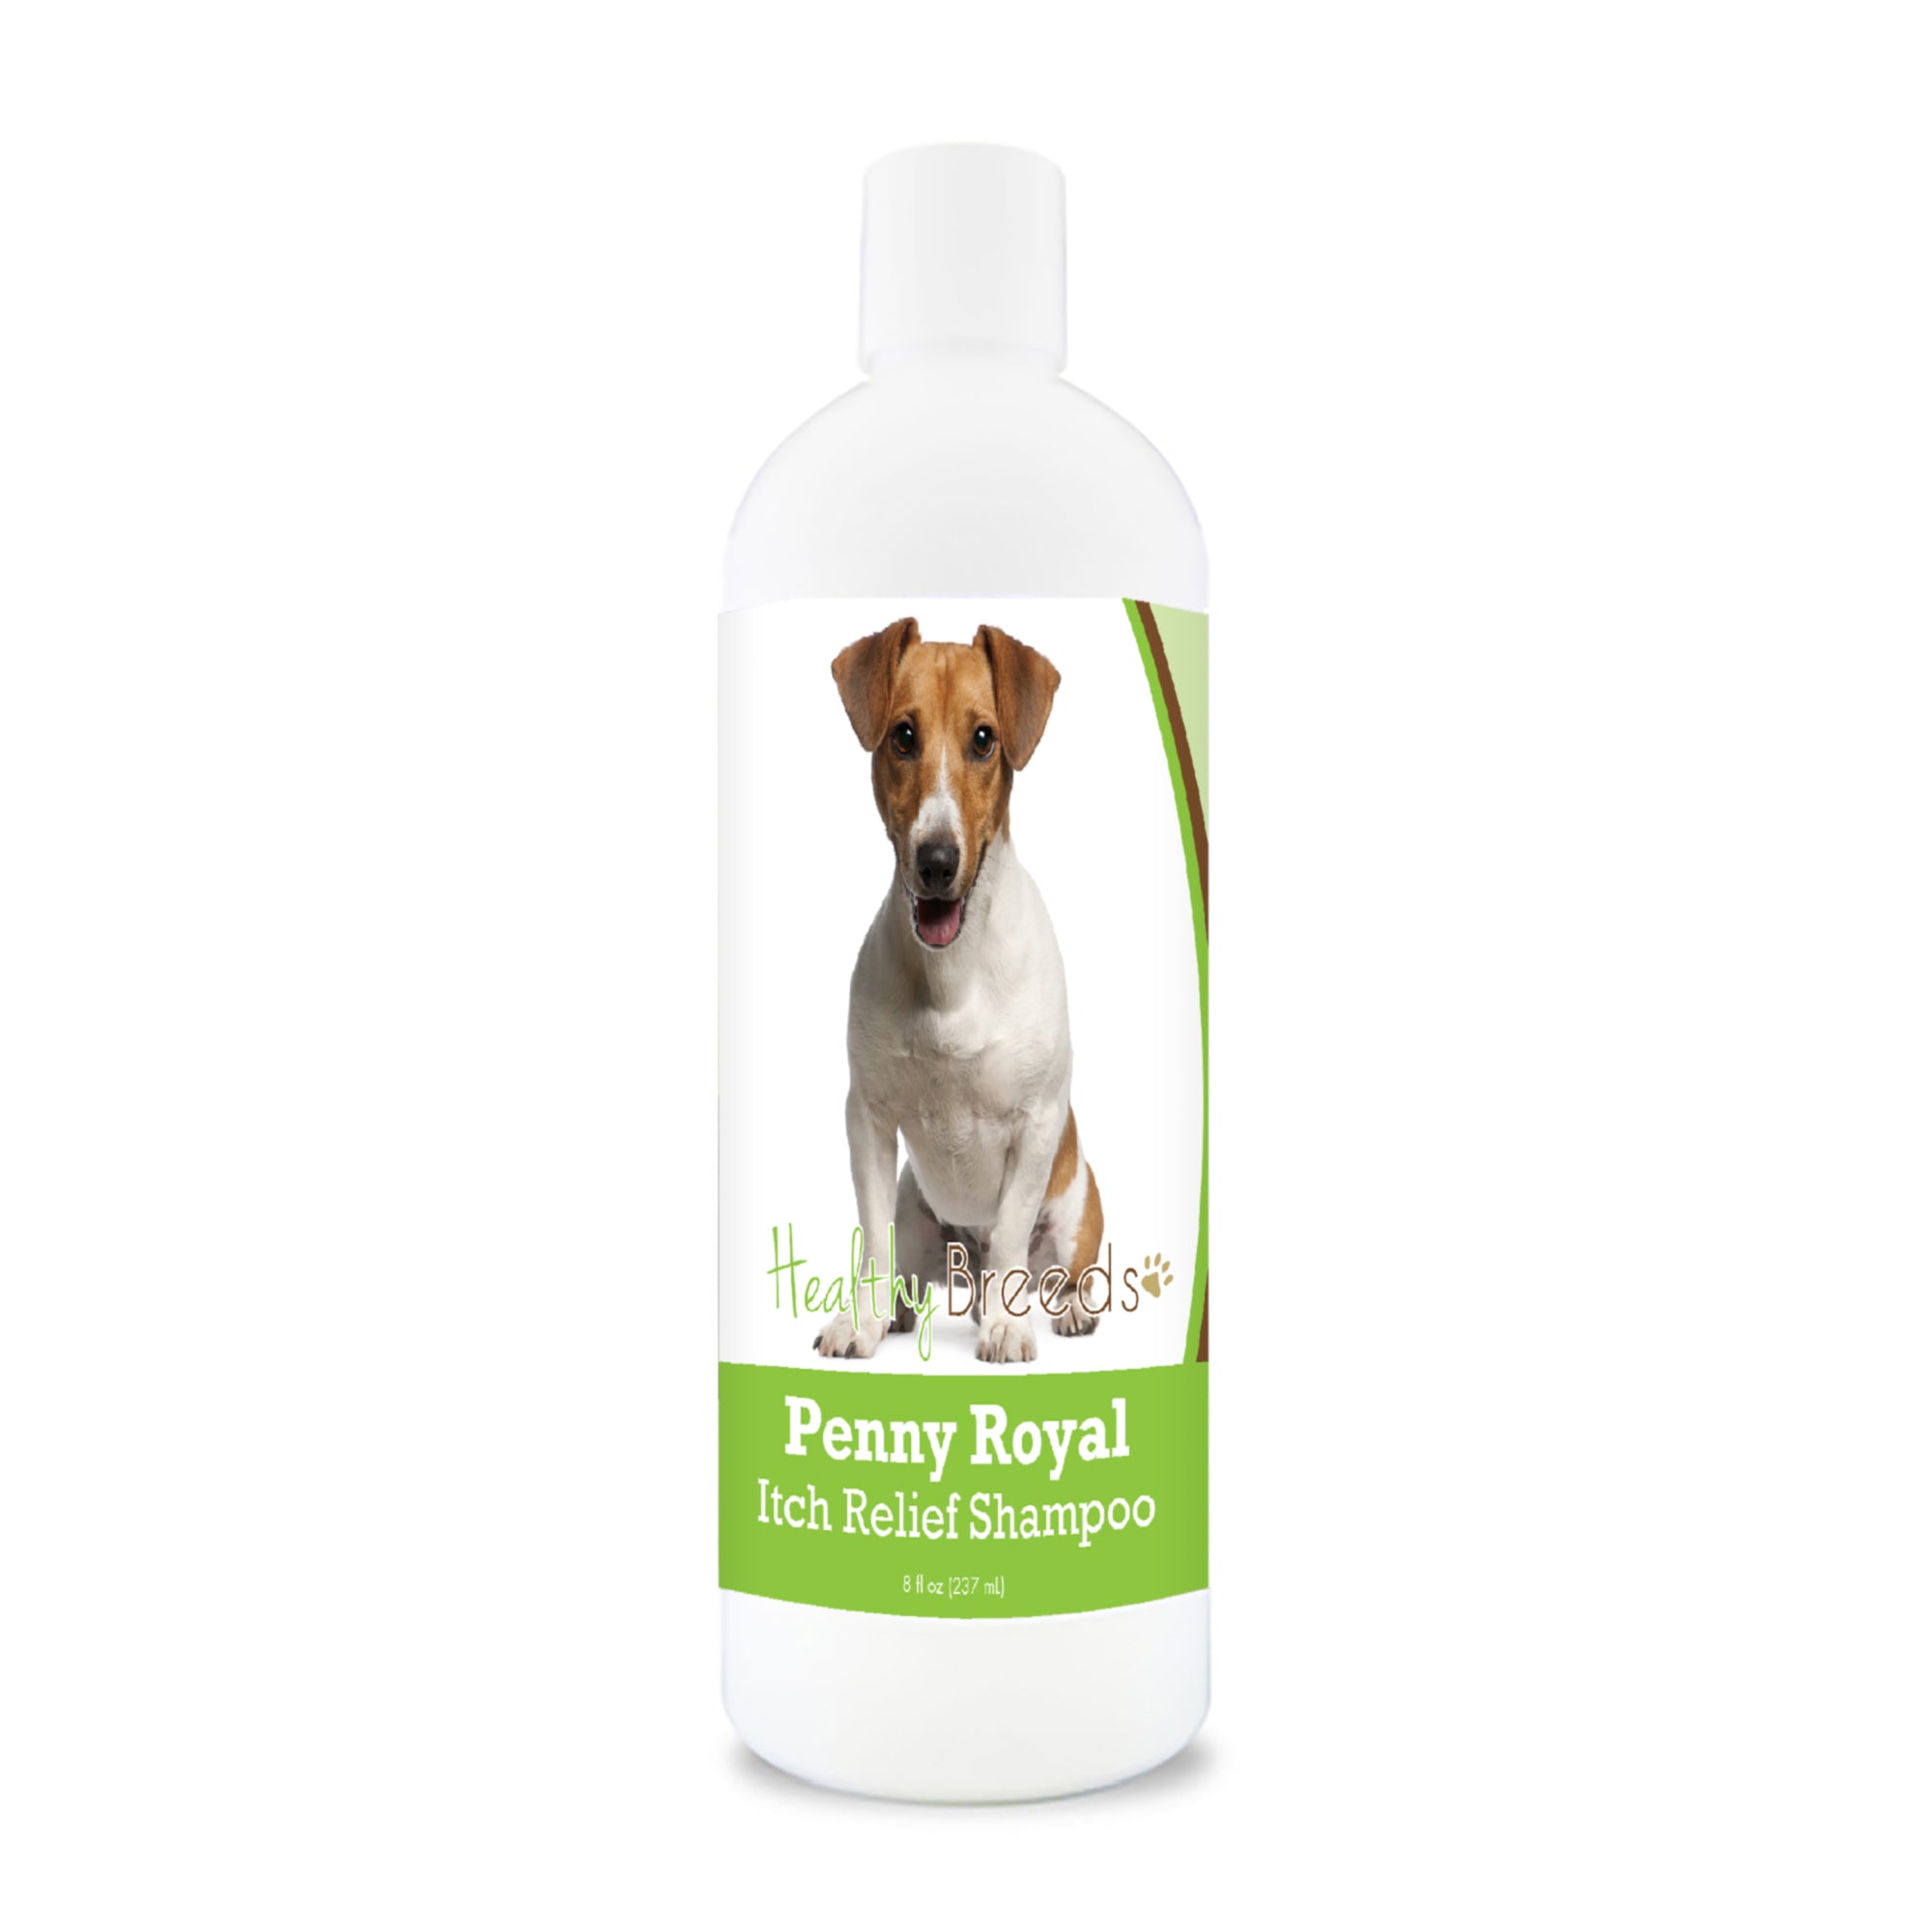 Jack Russell Terrier Penny Royal Itch Relief Shampoo 8 oz